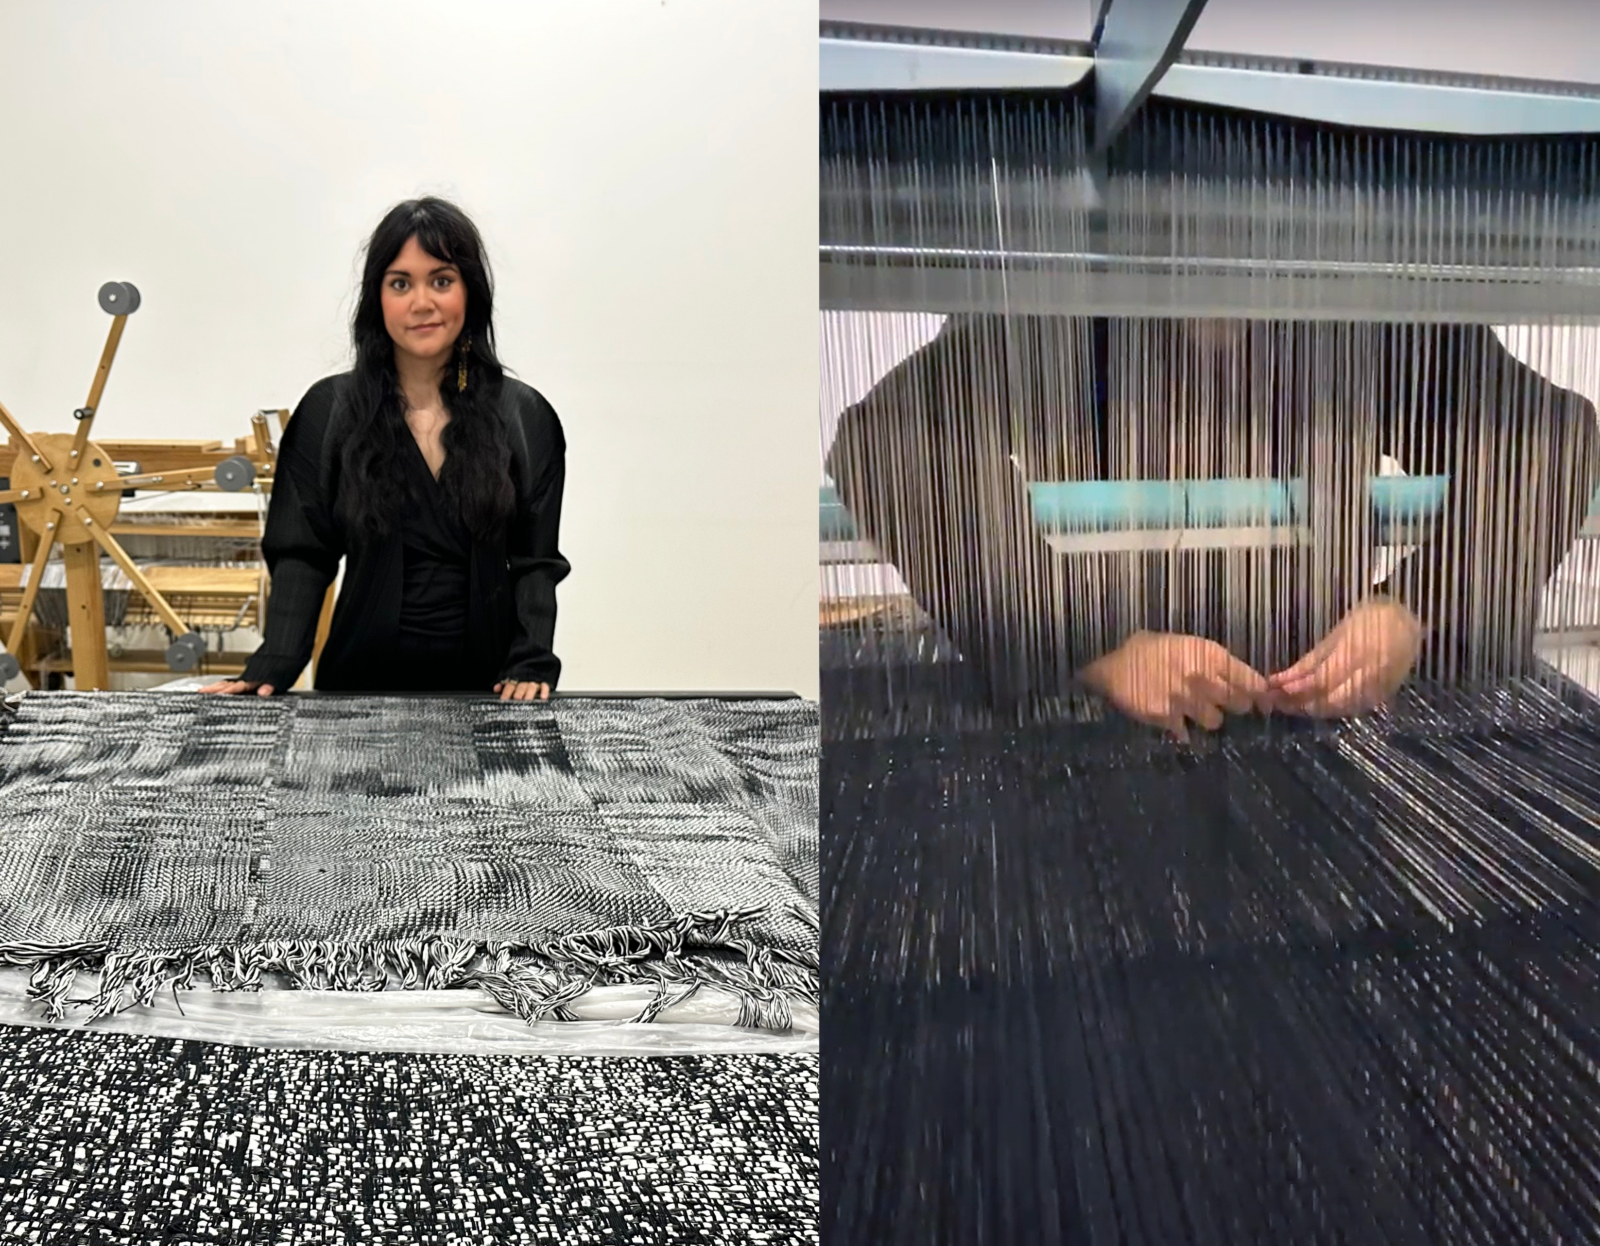 a woman with black hair wearing a black dress in front of a black and white woven fabric on the right there is another image composited in of hands dressing a loom